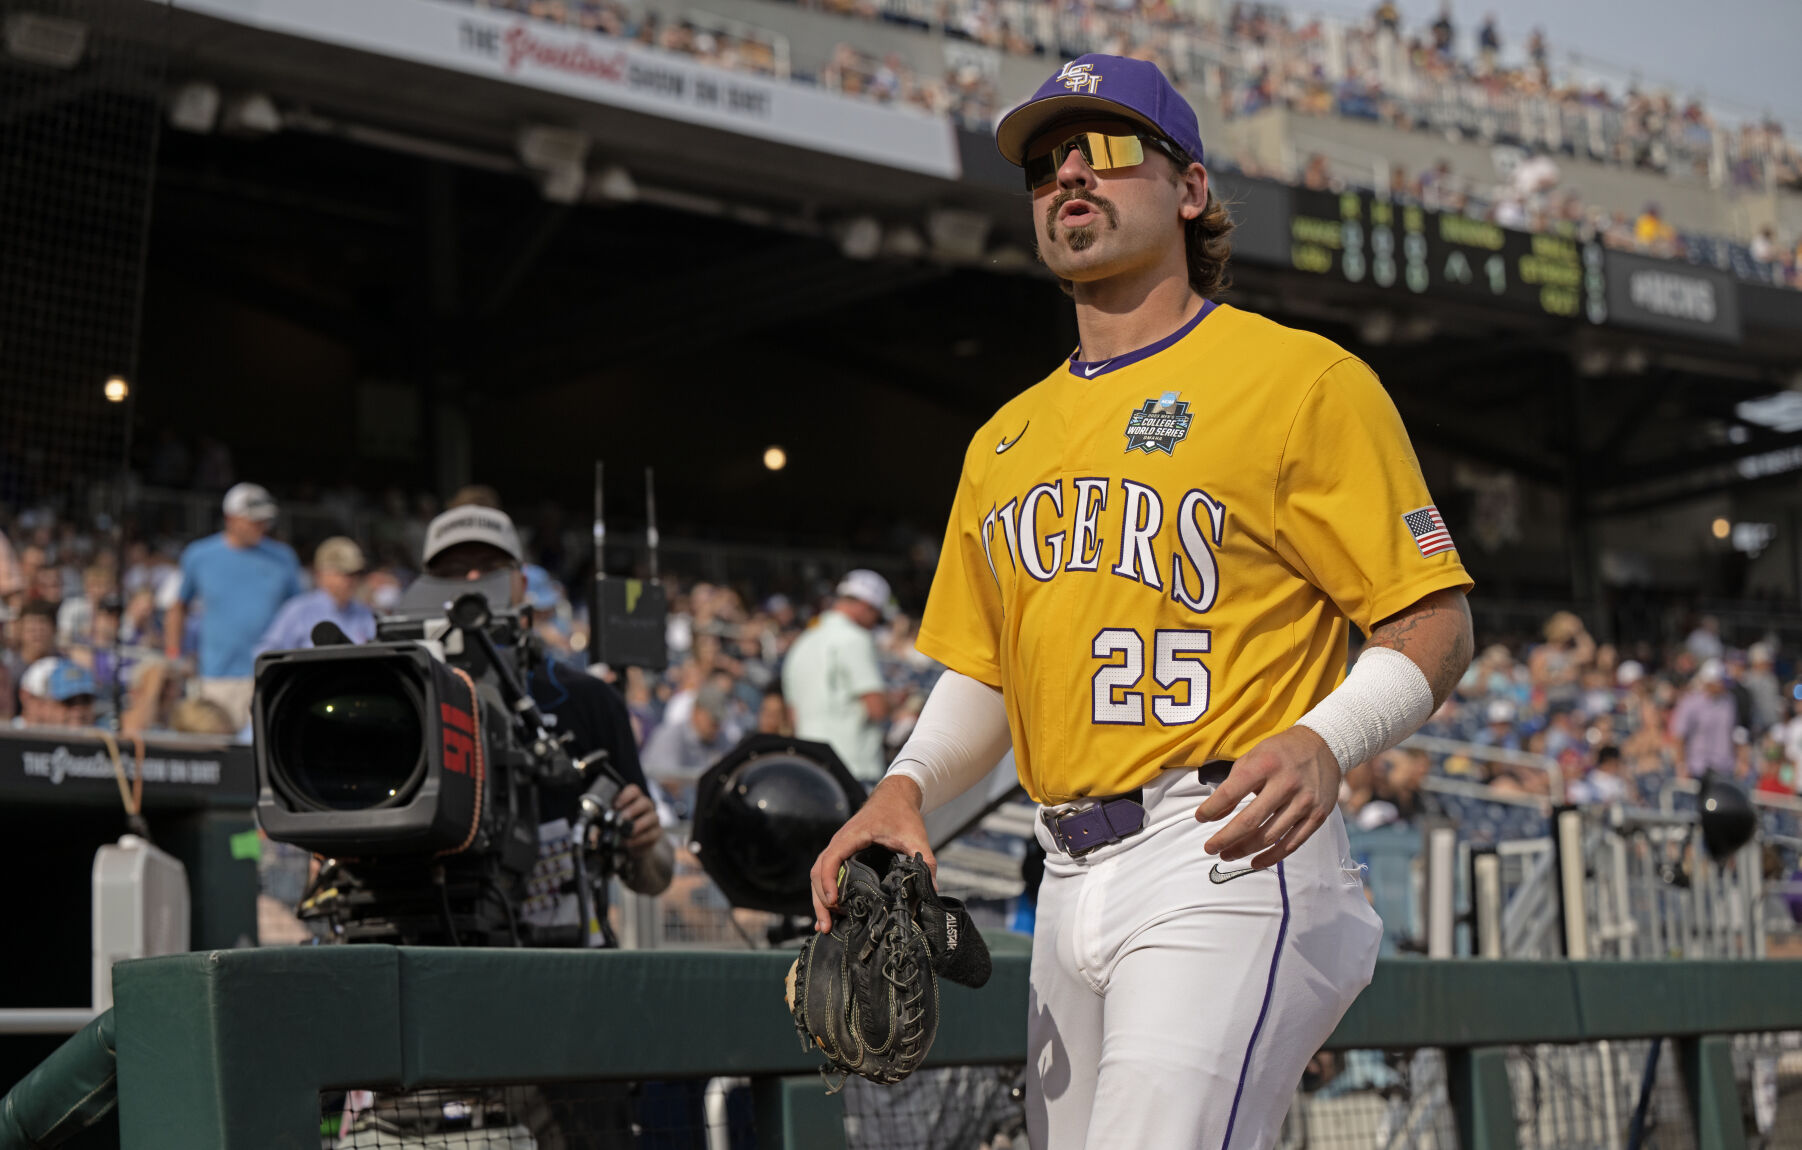 LSU baseball down one catcher headed into national championship series